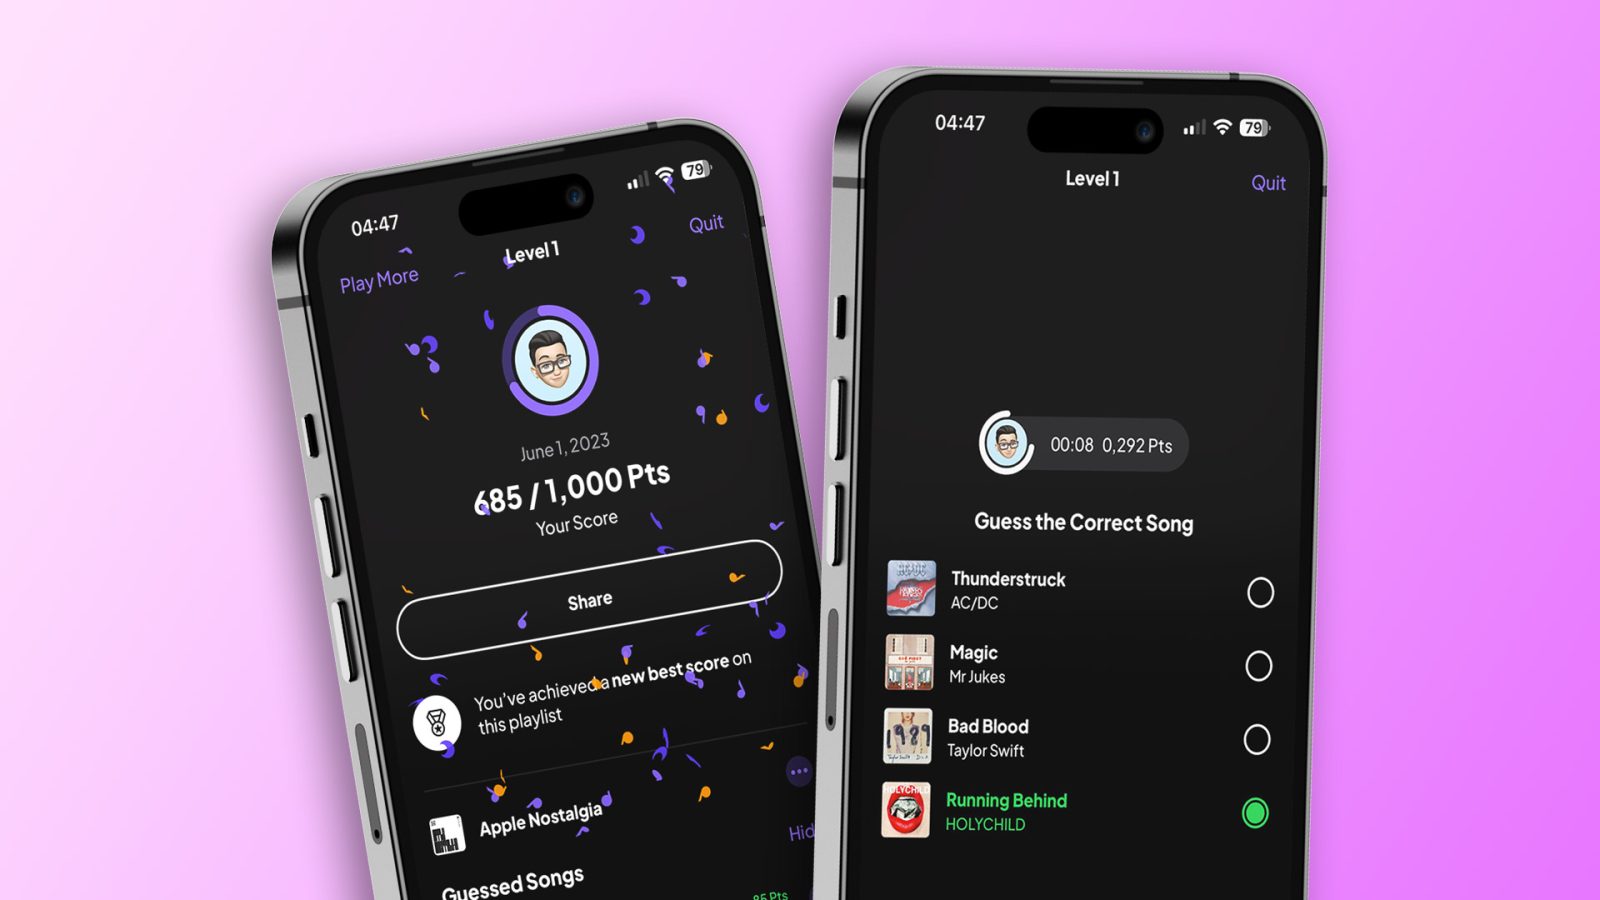 SongCapsule Quiz is a fun new iPhone game that uses your Apple Music library